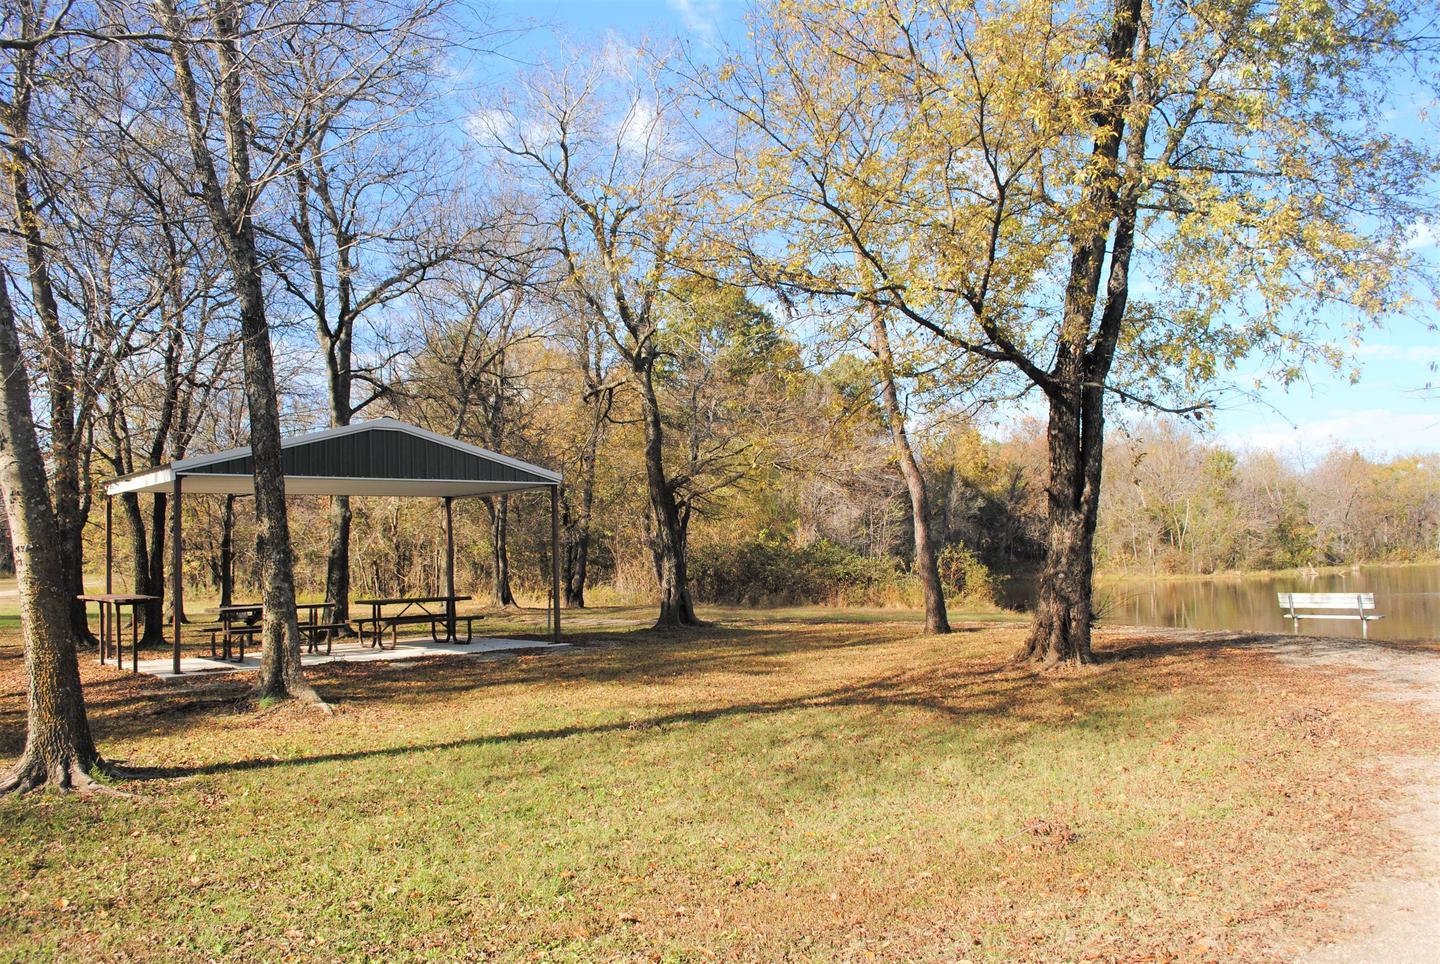 Gentry Creek Youth Fishing PondFishing Pond and Picnic Shelter